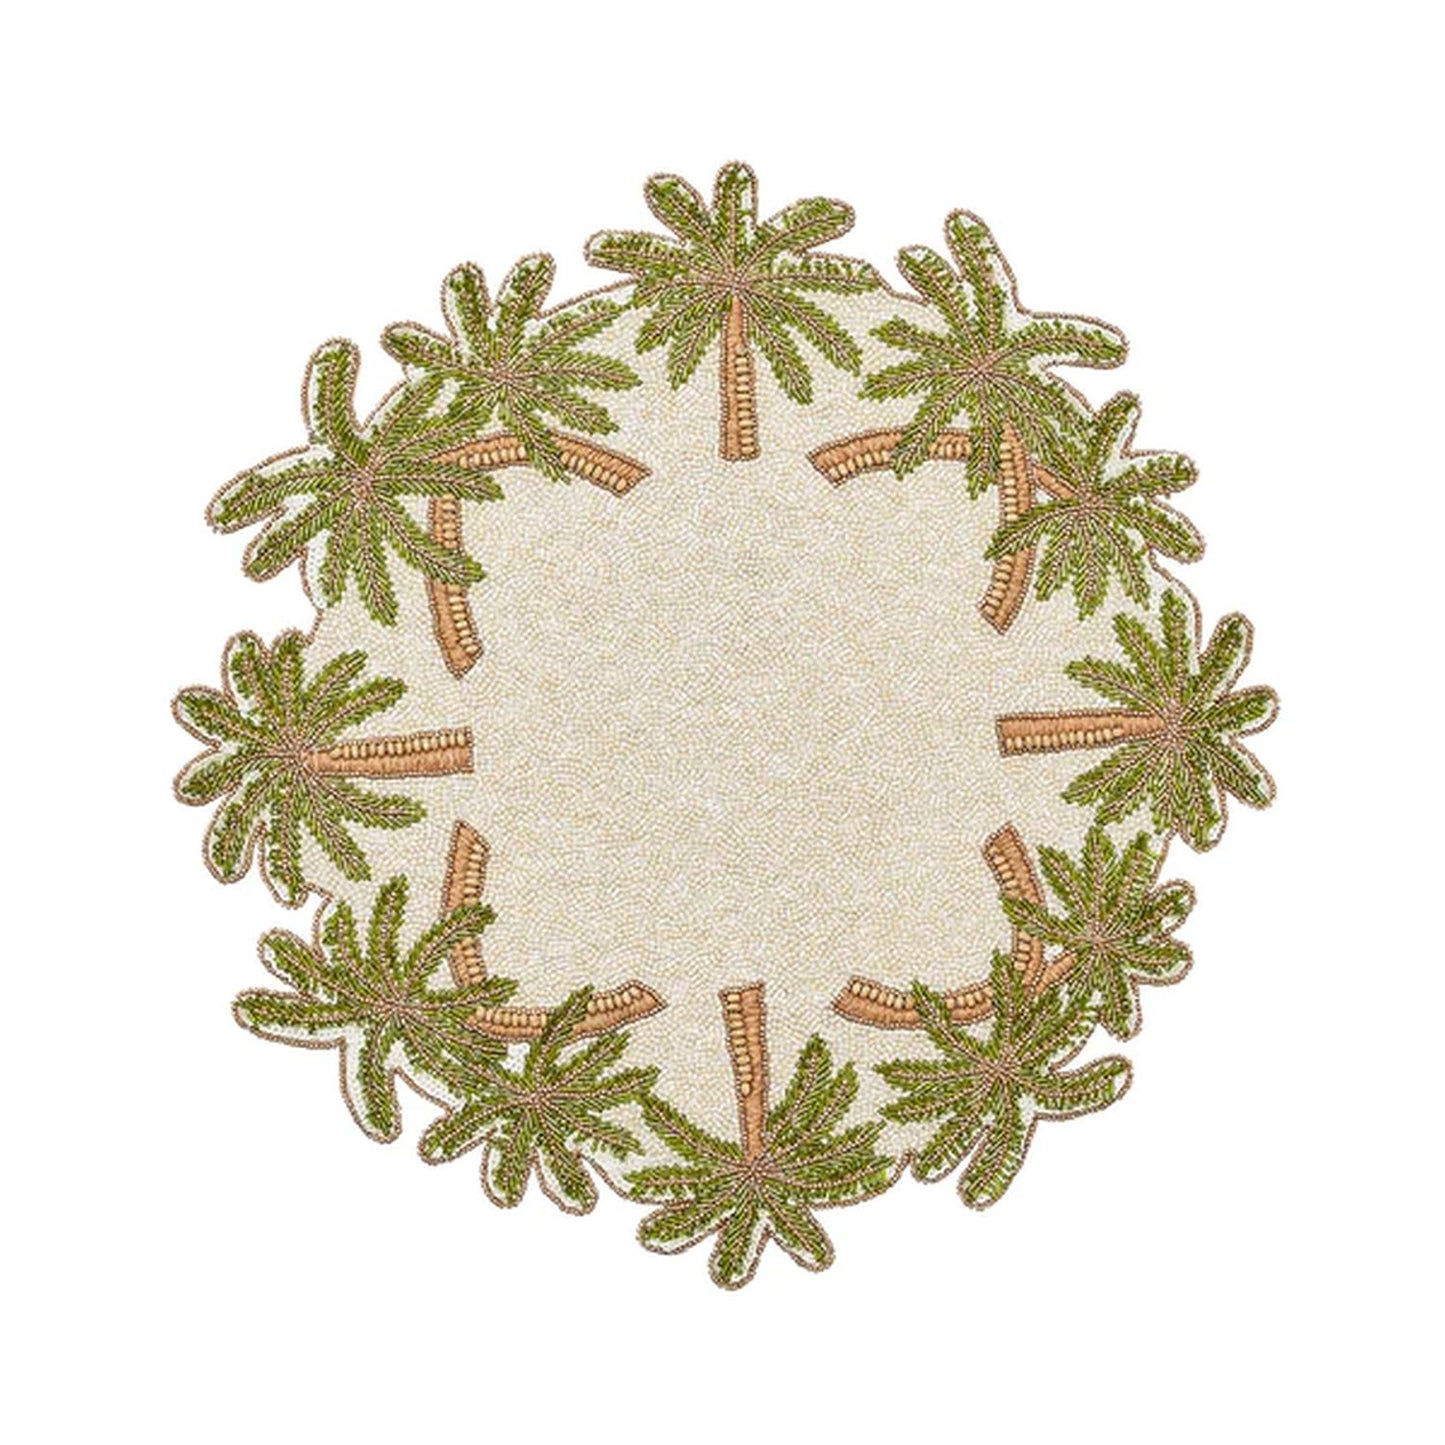 Kim Seybert Oasis Placemat in Ivory, Green & Gold, Set of 2